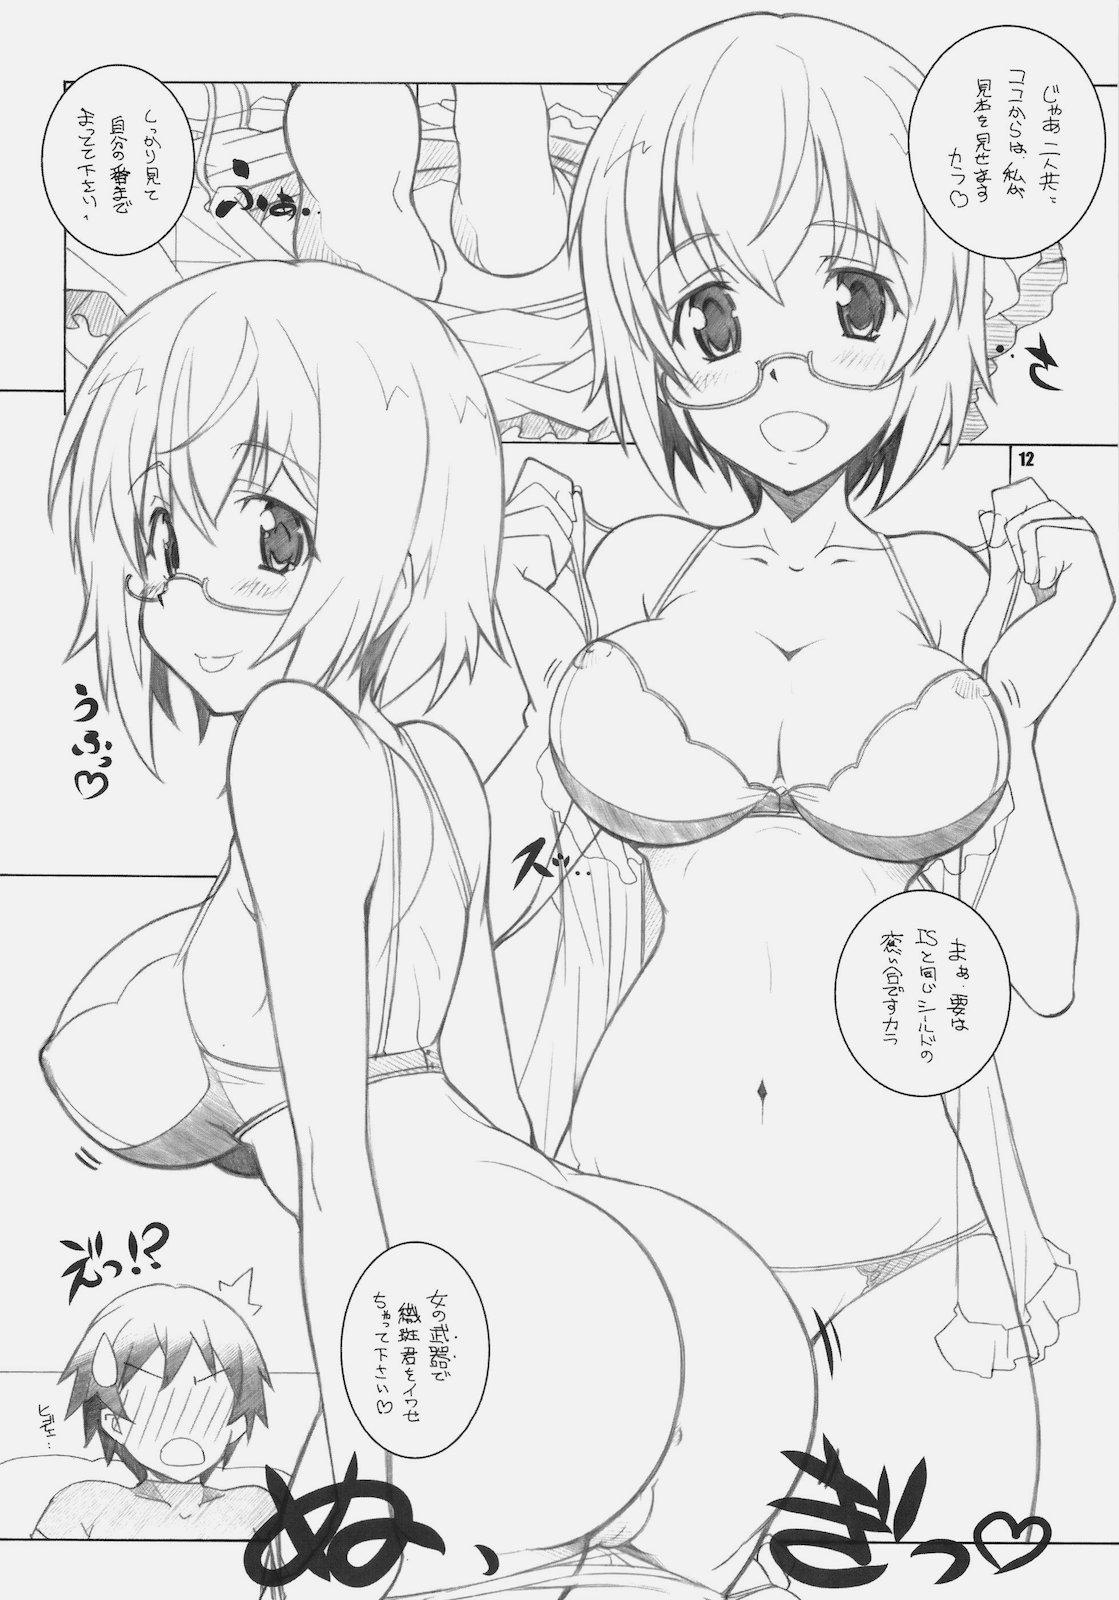 Erotica SEA IS - Infinite stratos Tight Ass - Page 11